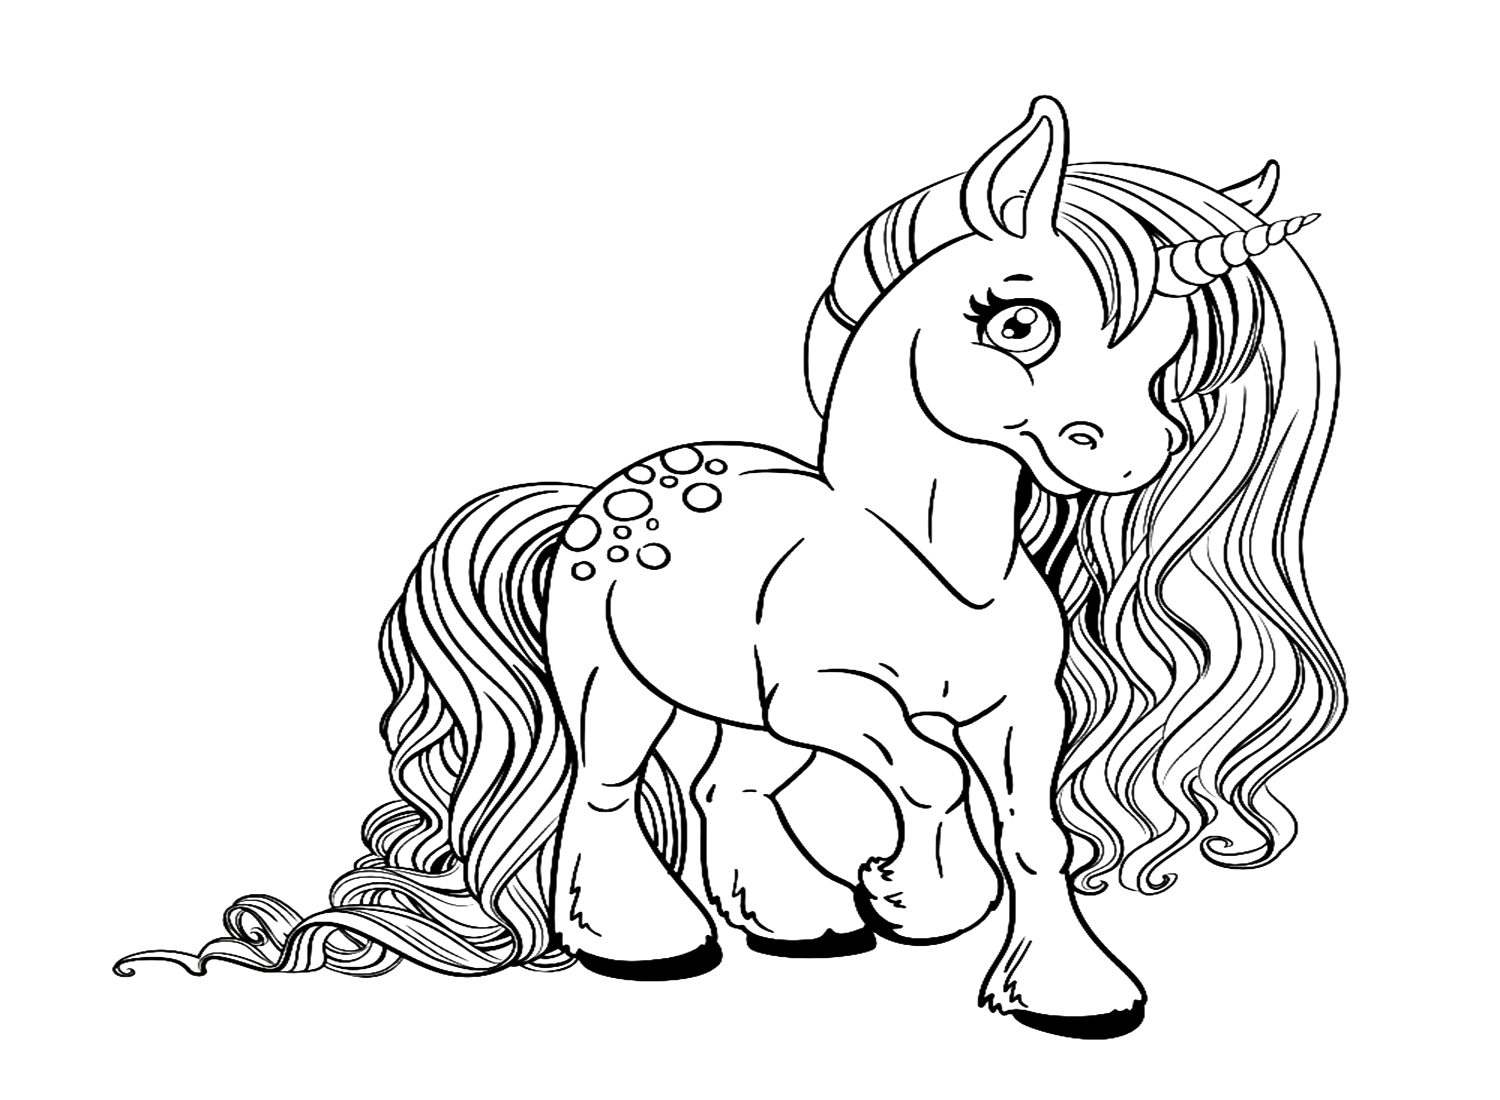 Unicorn Pictures To Color from Unicorn